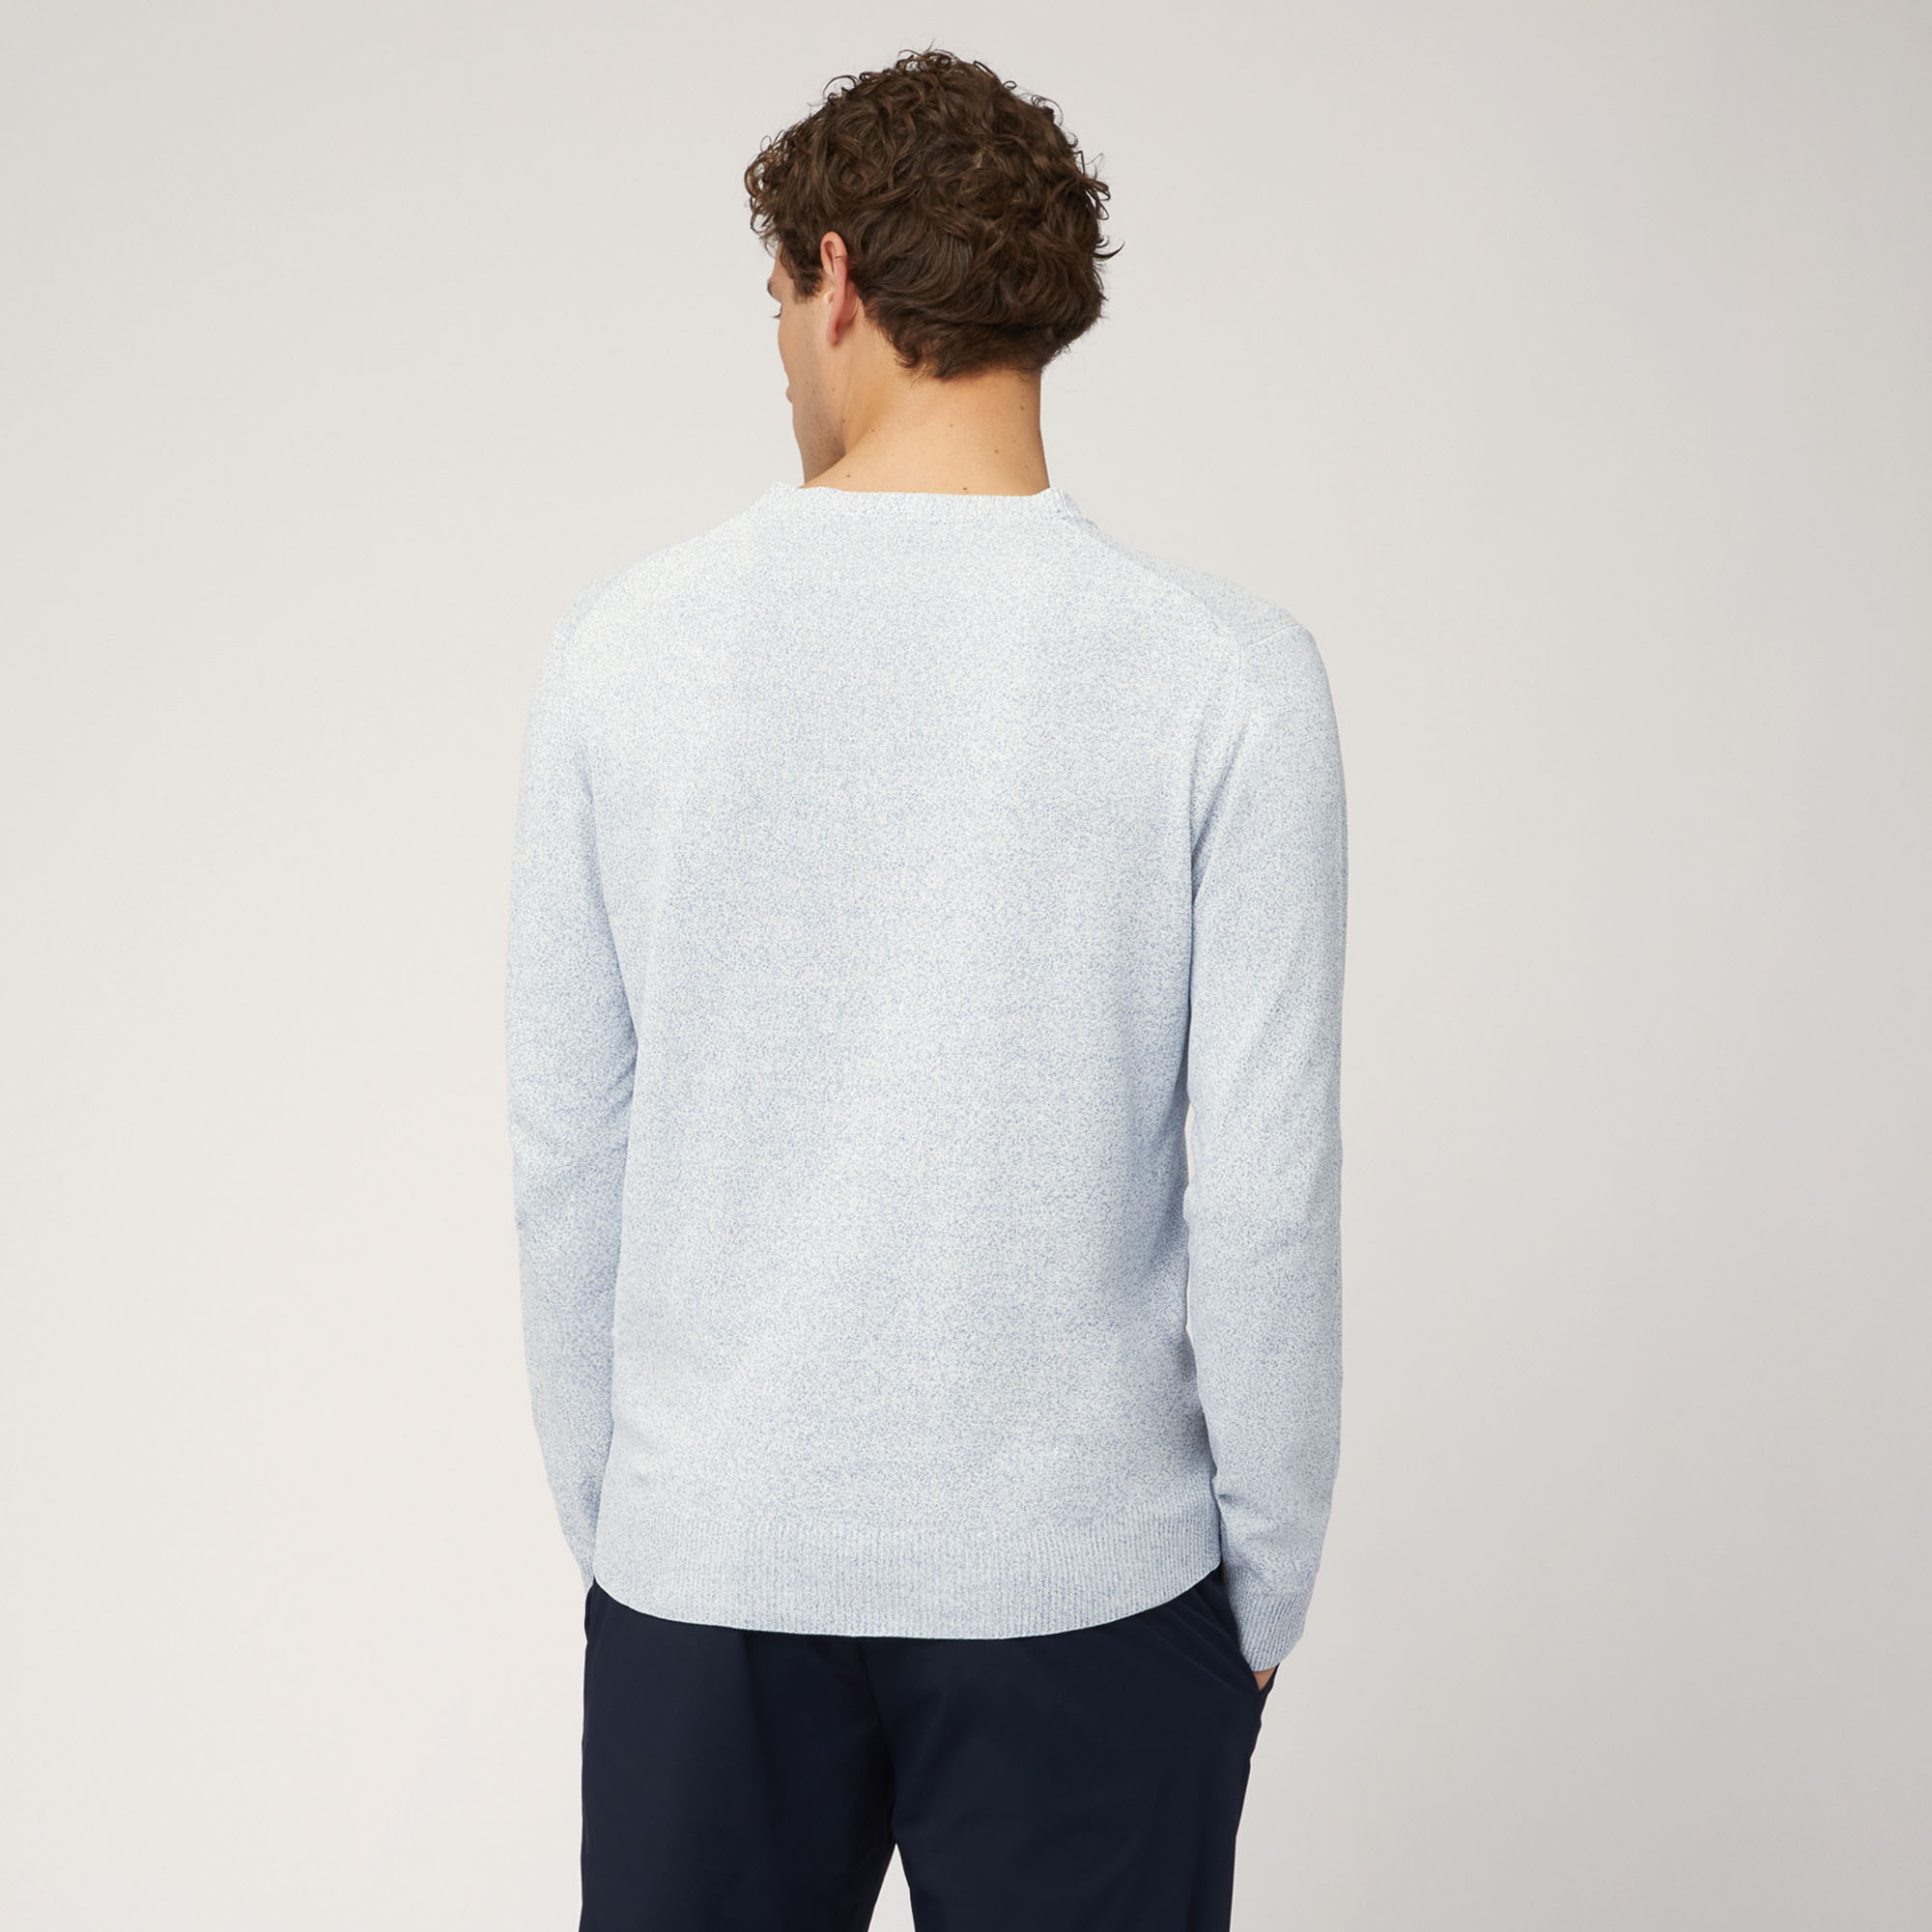 Crew Neck Pullover in Technical Yarn